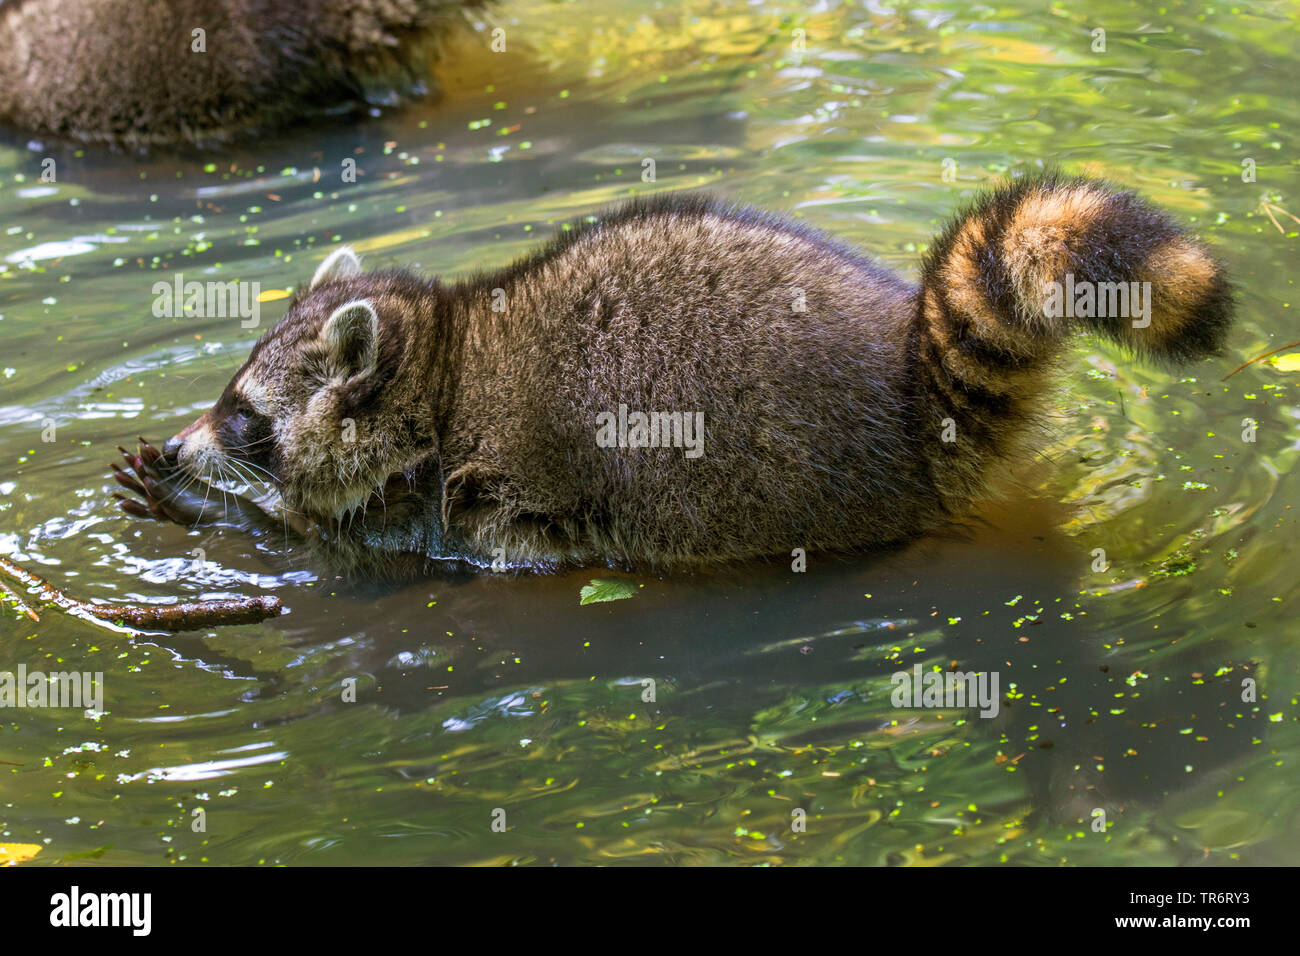 common raccoon (Procyon lotor), foraging in shallow water, Germany Stock Photo